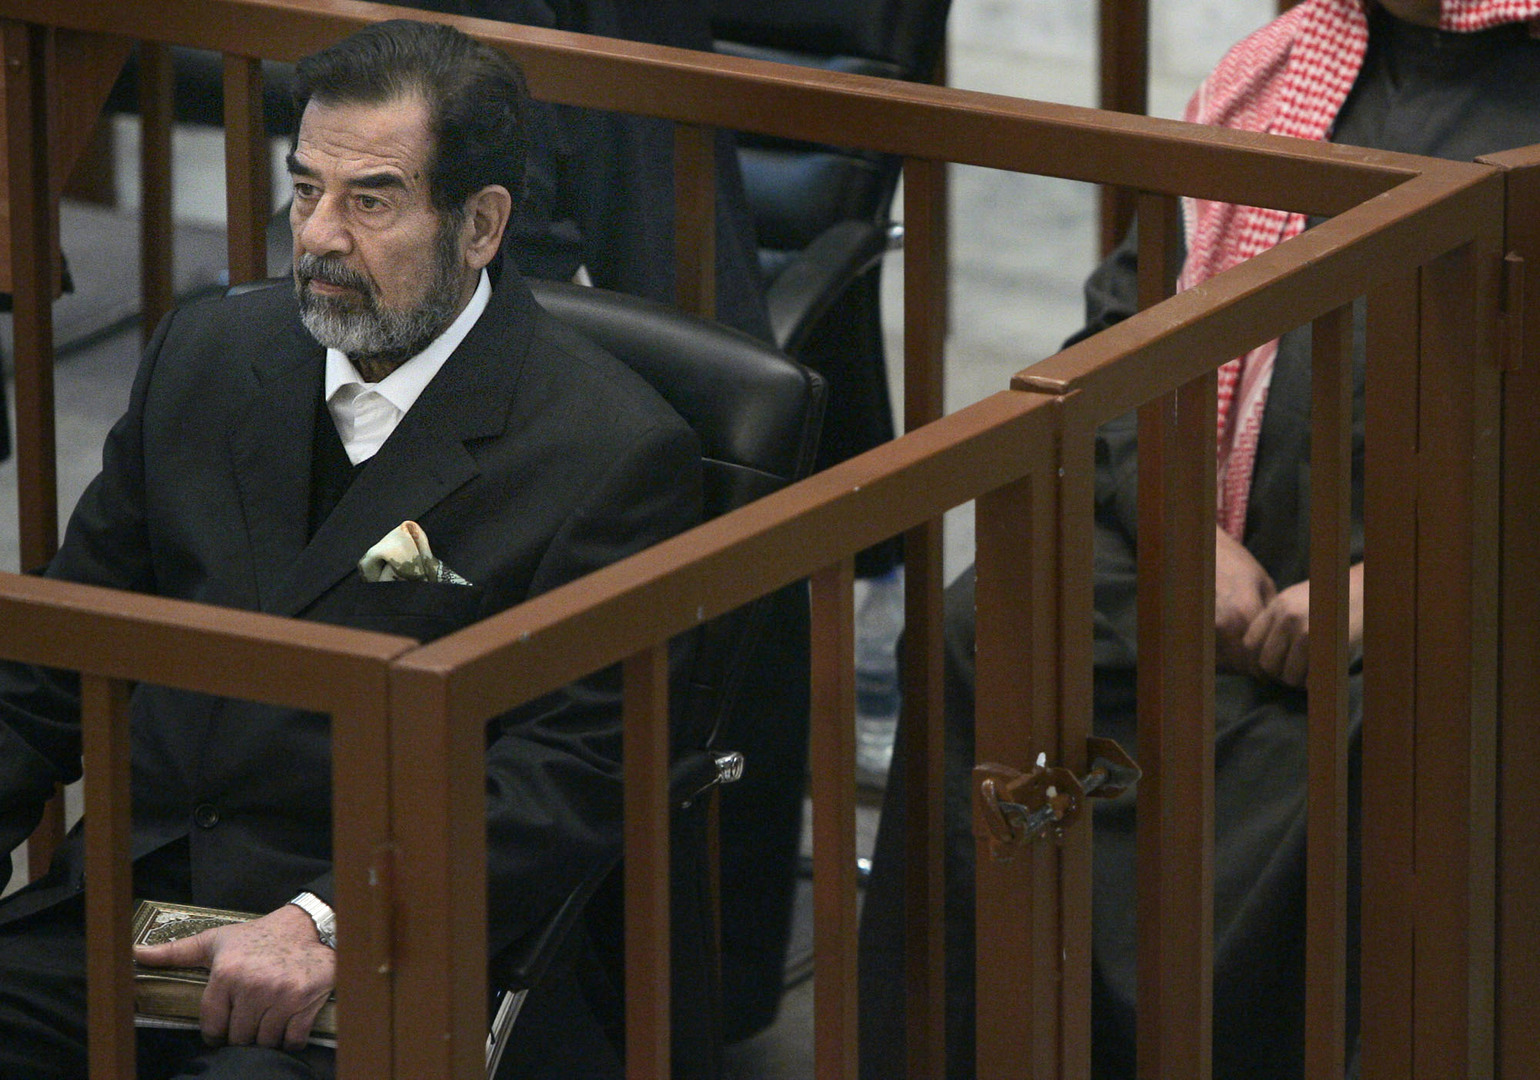 Attorney Bushra al-Khalil reveals details and footage of Saddam Hussein's trial and the secrets of his side conversations with him